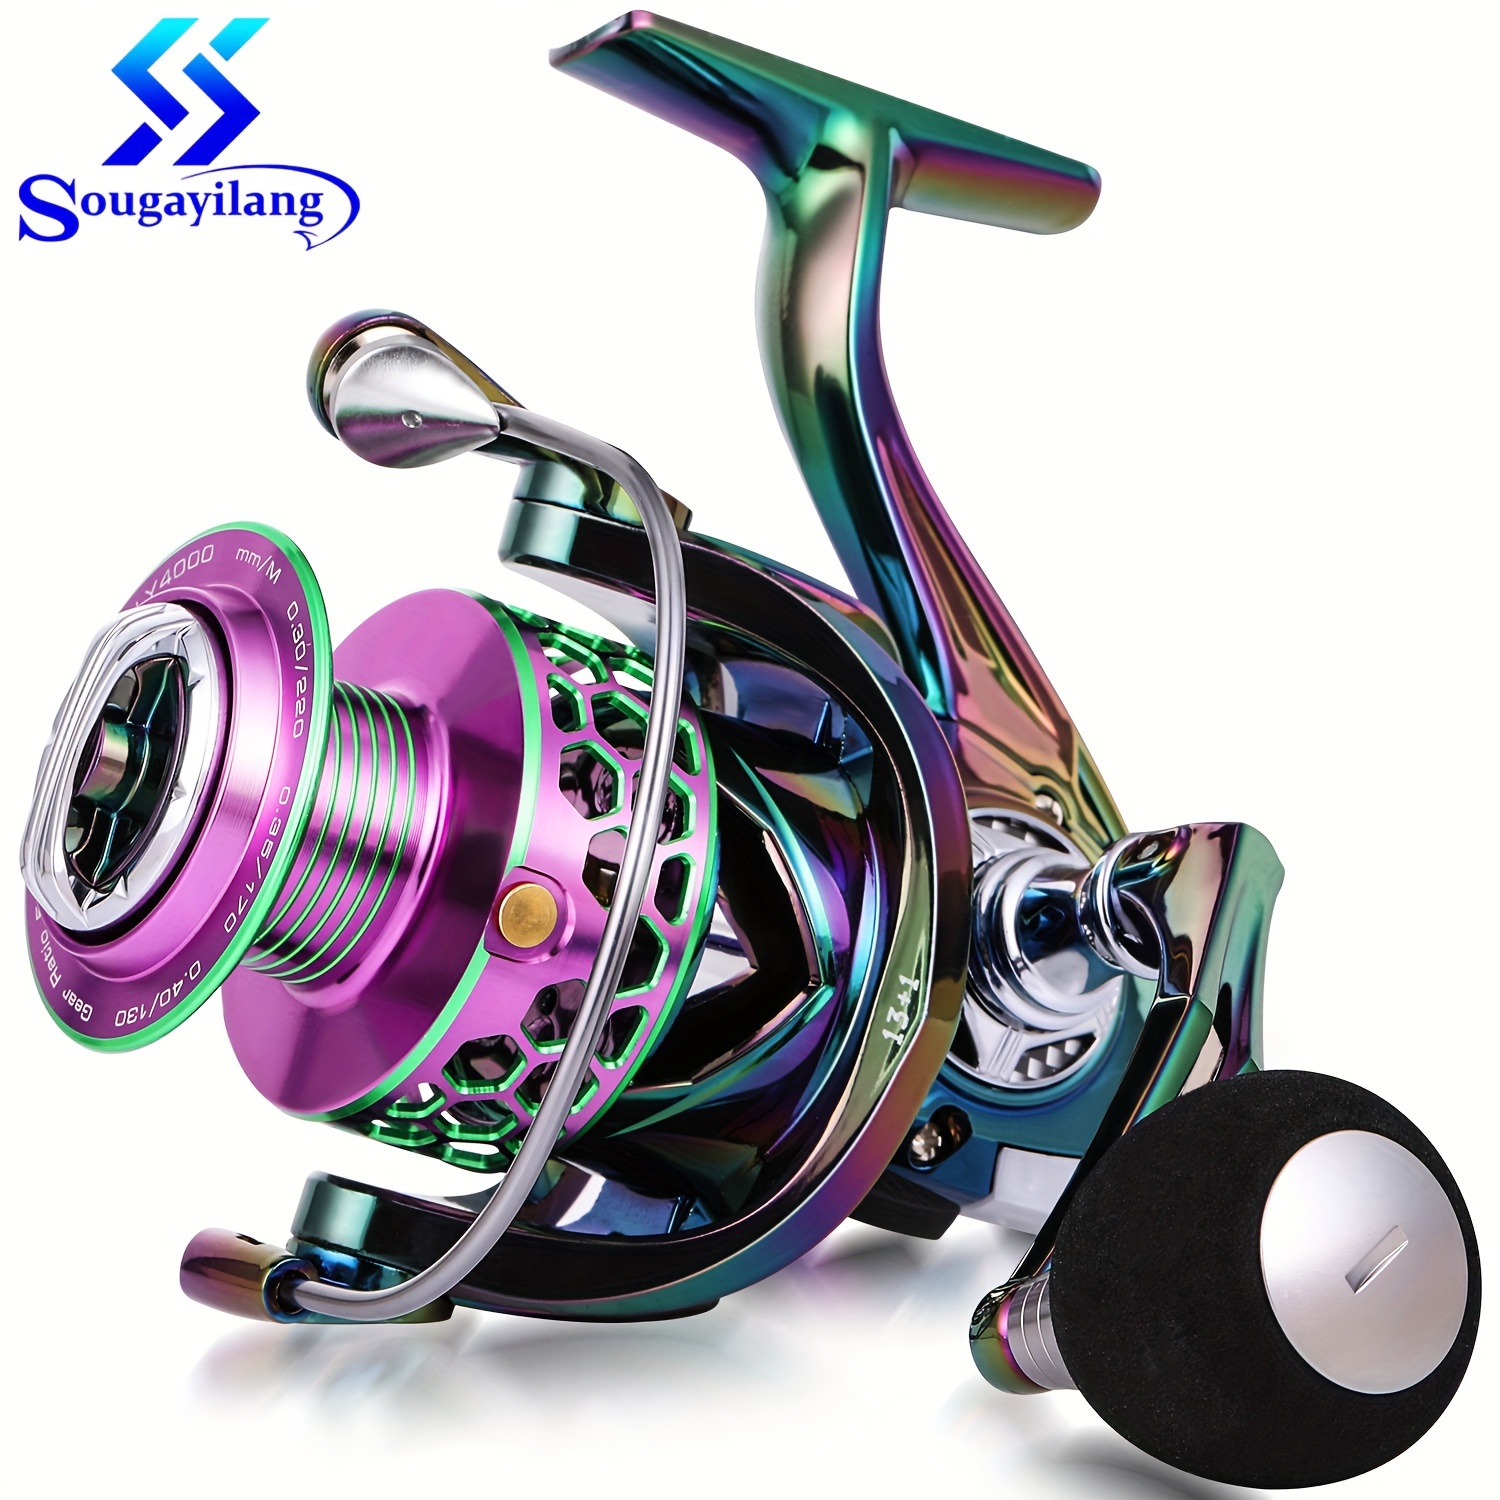 

Sougayilang 1pc 1000-4000 Series Spinning Reel, Super Light Cnc Aluminum Spool, 13+1bb, 5.2:1 High Gear Ratio, Durable Metal Fishing Reel For Freshwater And Saltwater